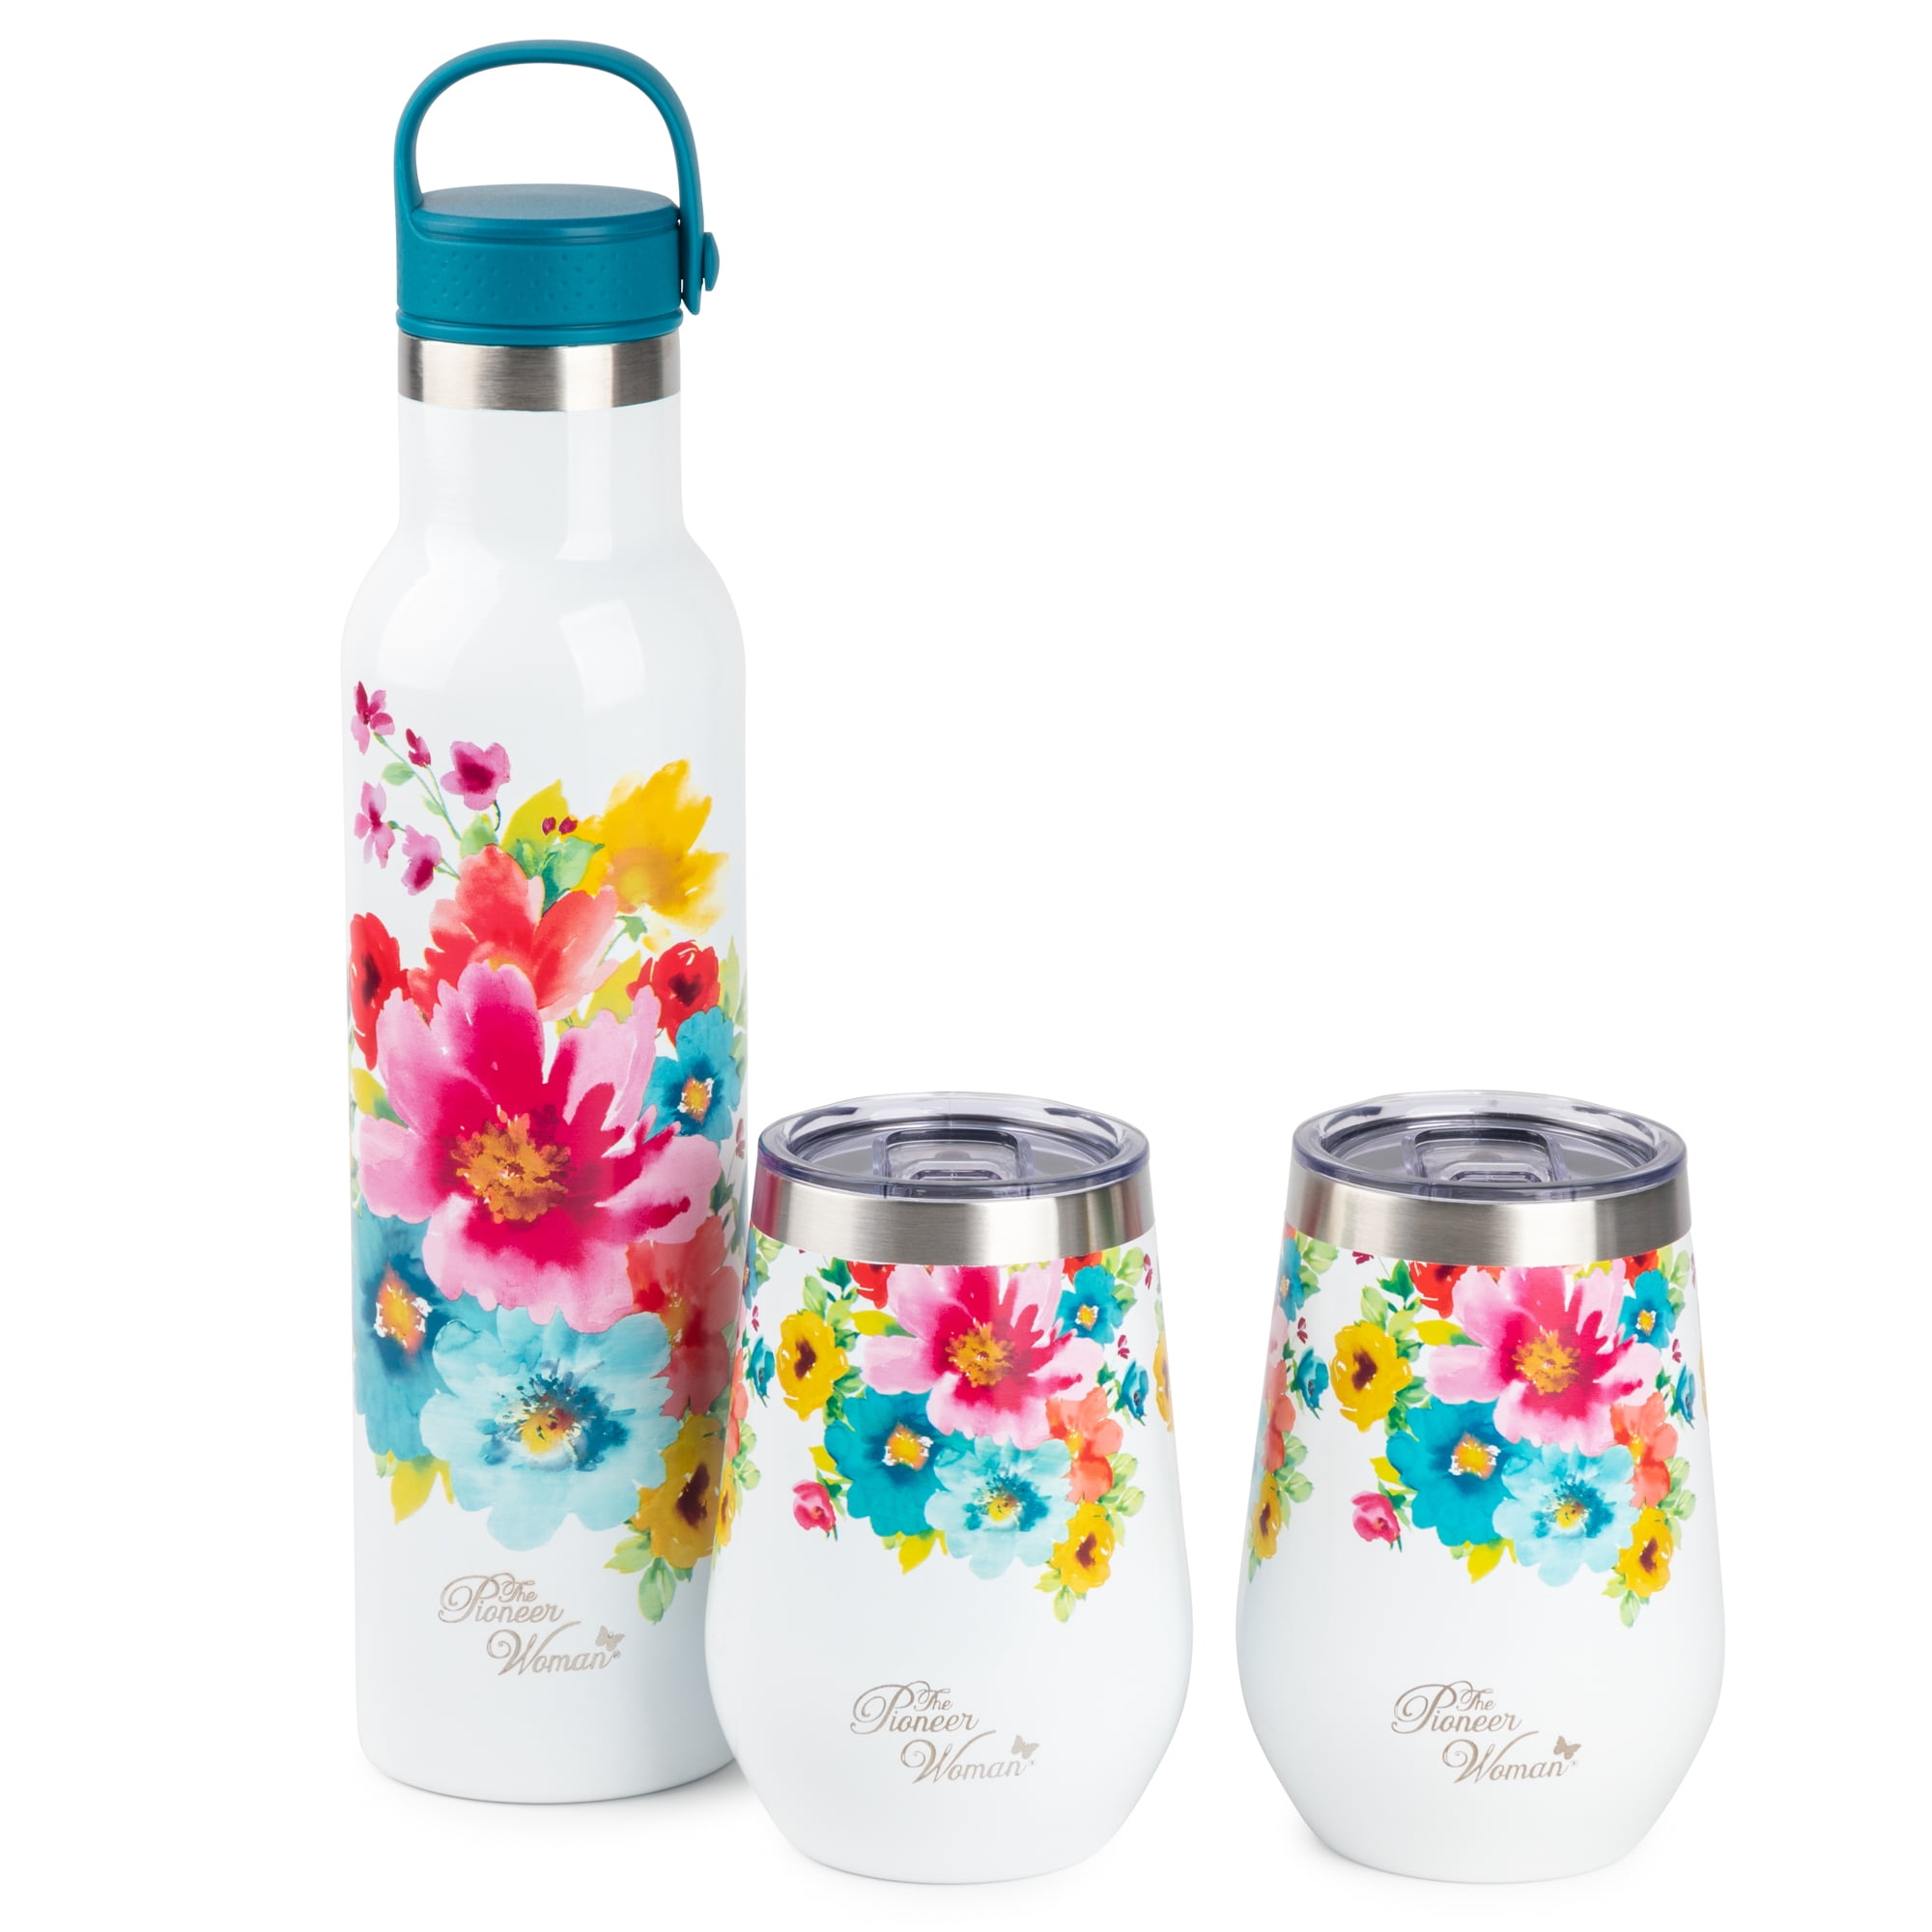 Double Wall Vacuum Insulated Stainless Steel Travel Mug and Wine Tumbler Set  14 fl. oz Pink Floral